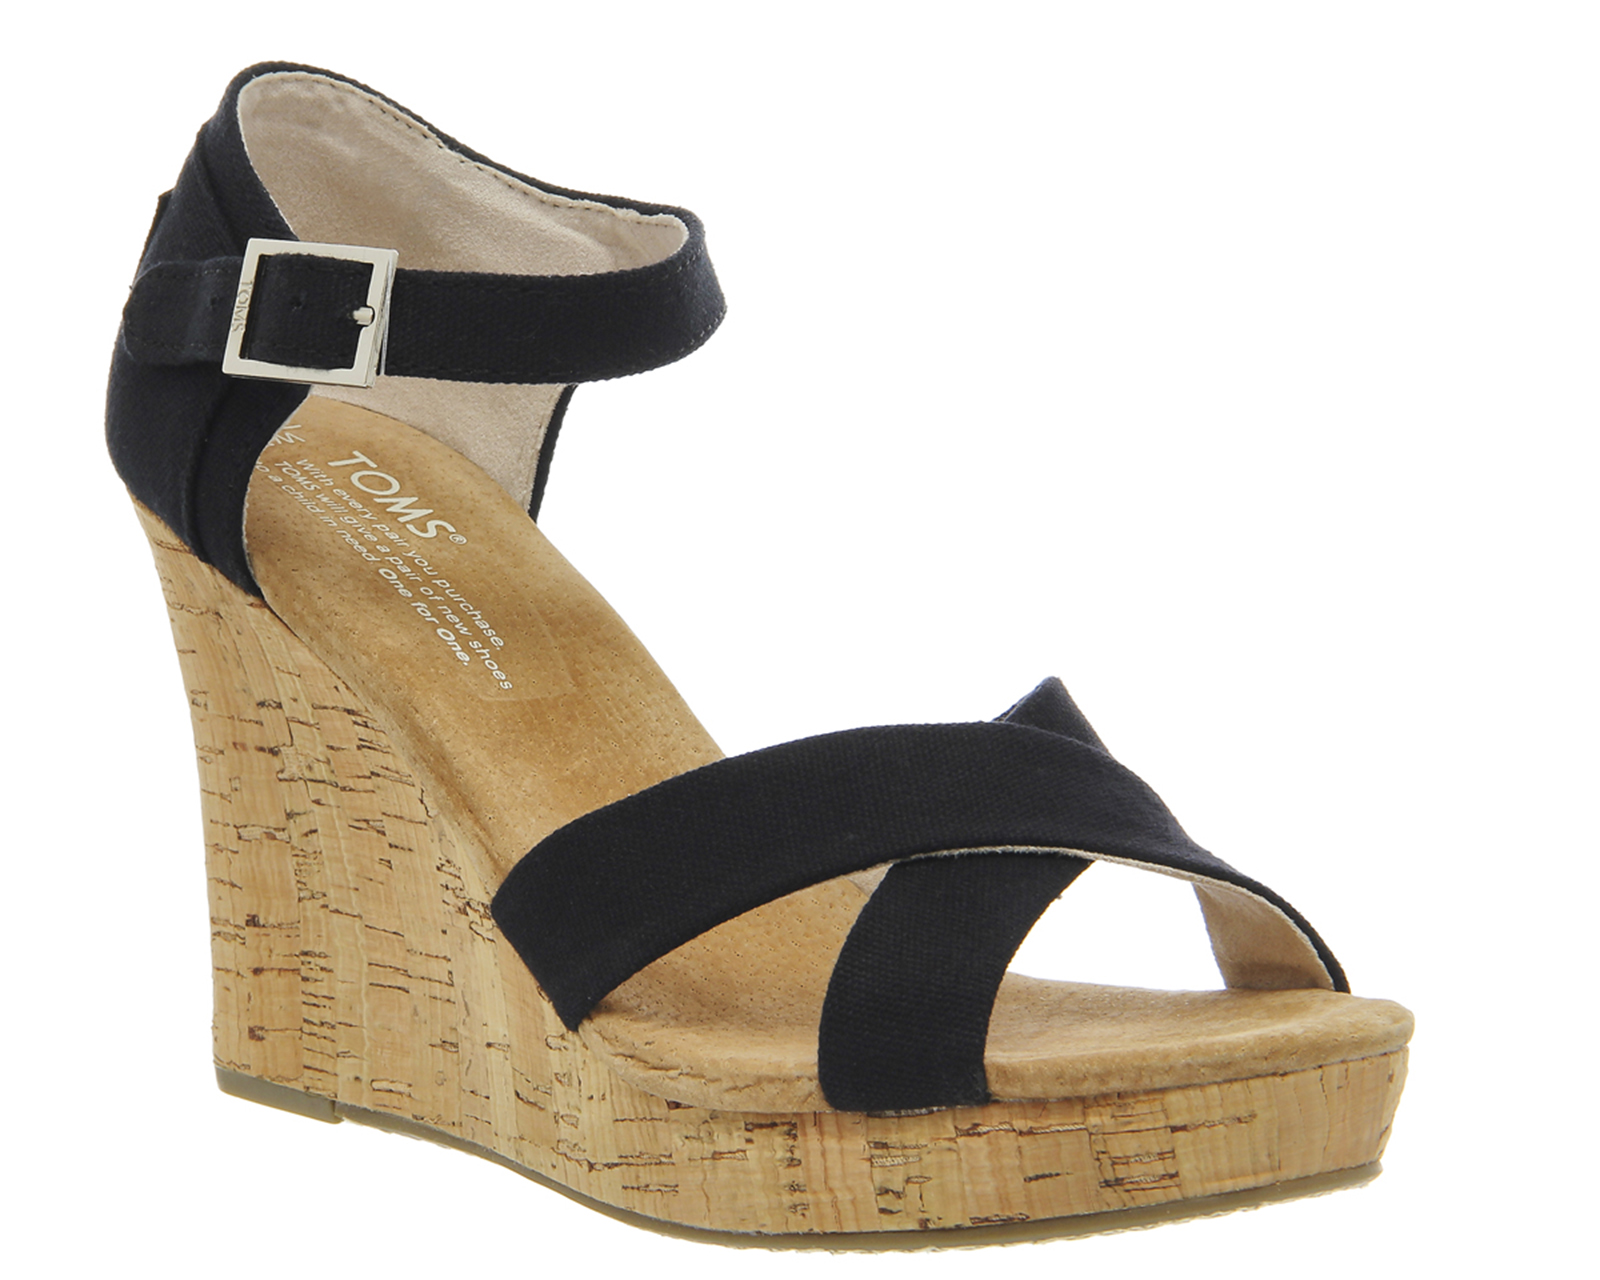 Toms Strappy Wedge Black Canvas - High 